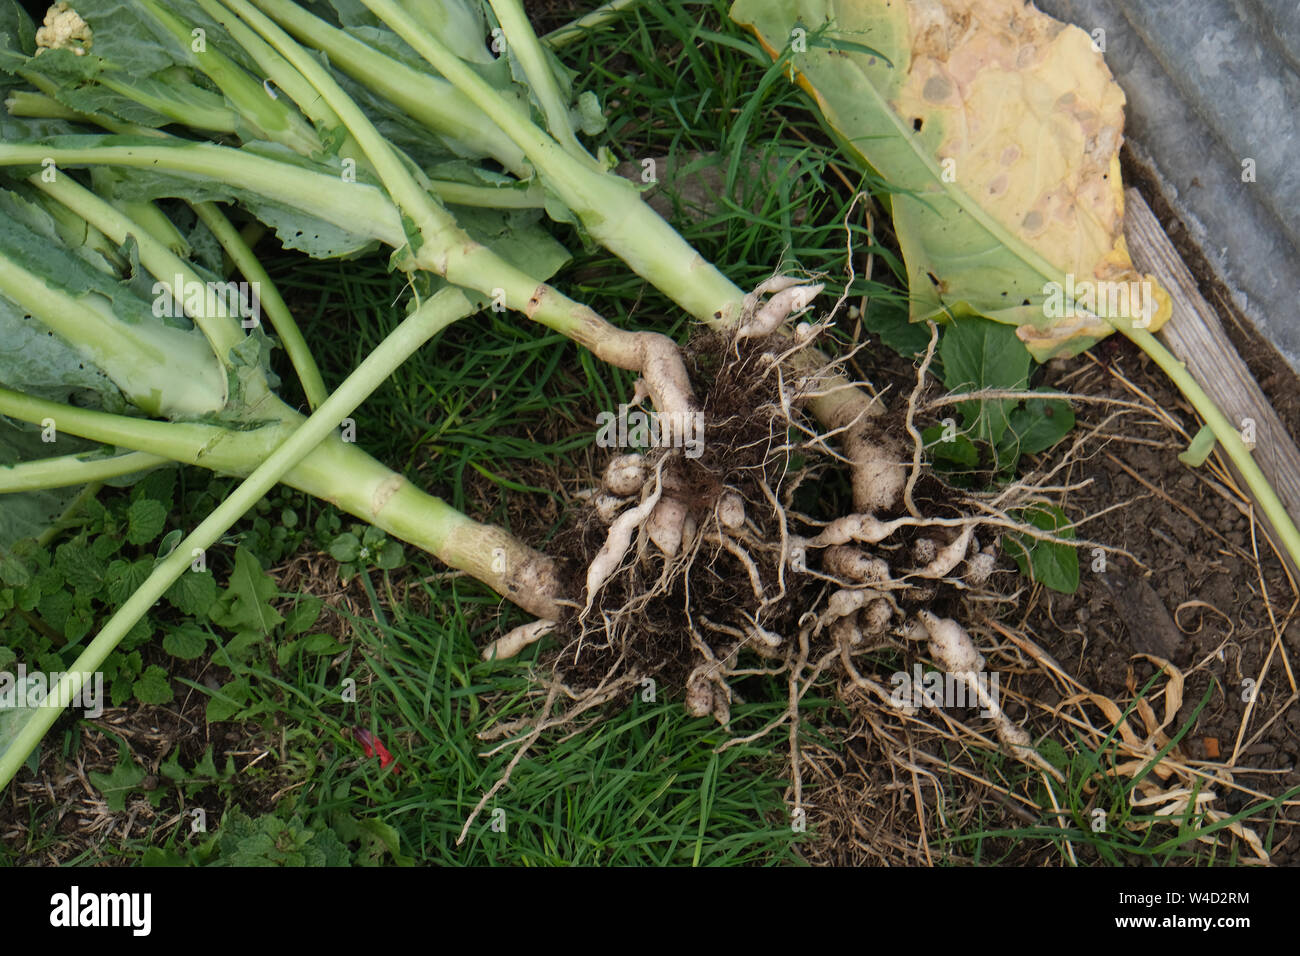 Cabbage plants with club root disease, a fungal infection which inhibits plant growth shown by distorted swollen roots. Stock Photo